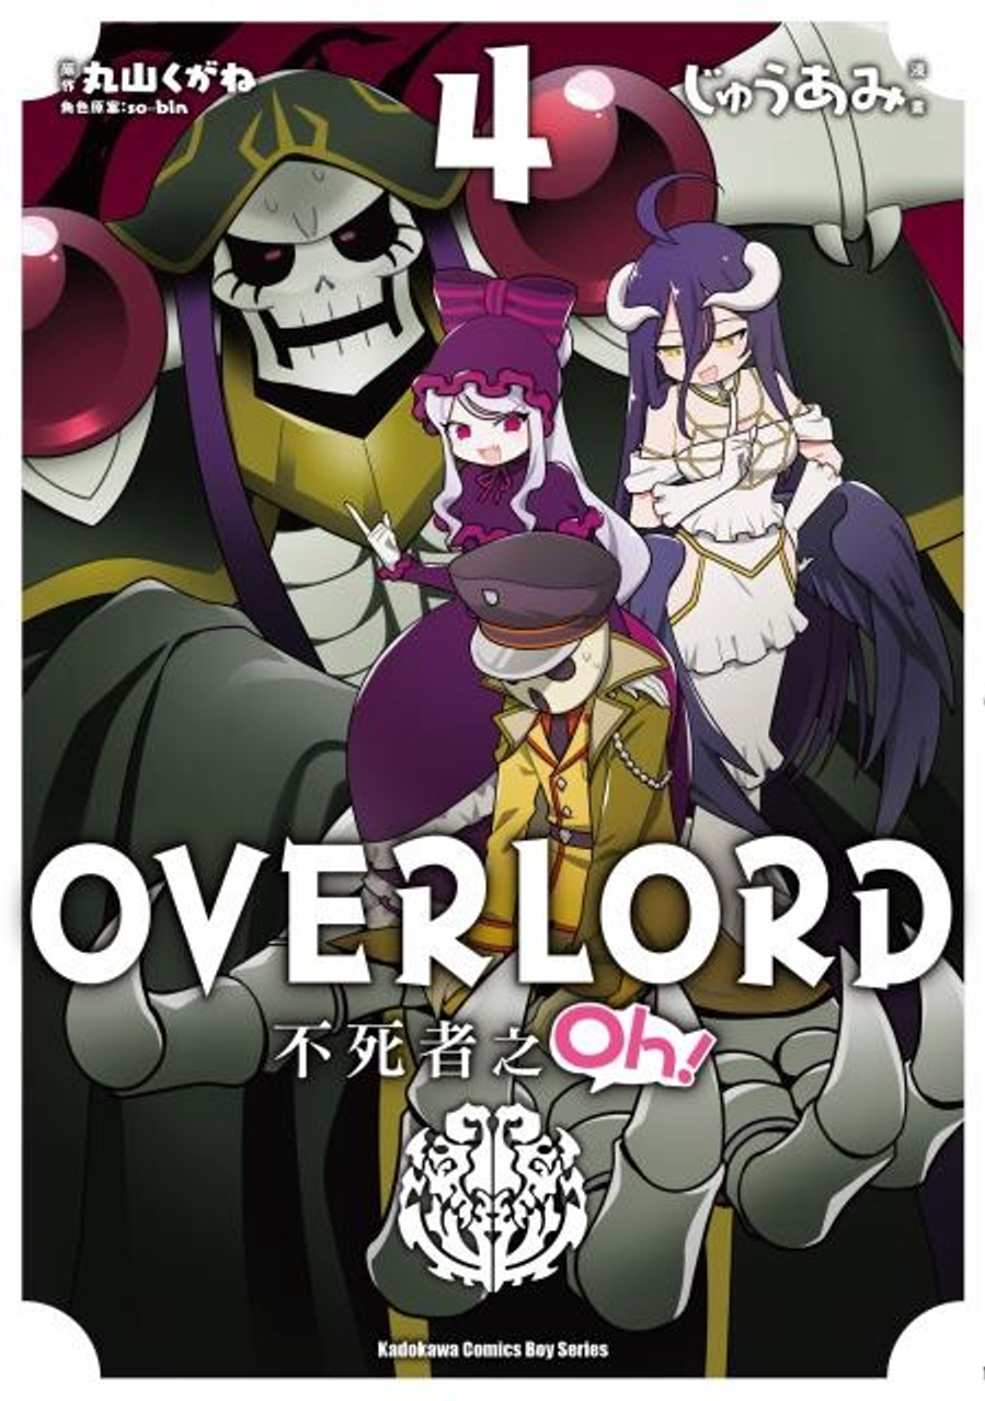 OVERLORD 不死者之Oh！...